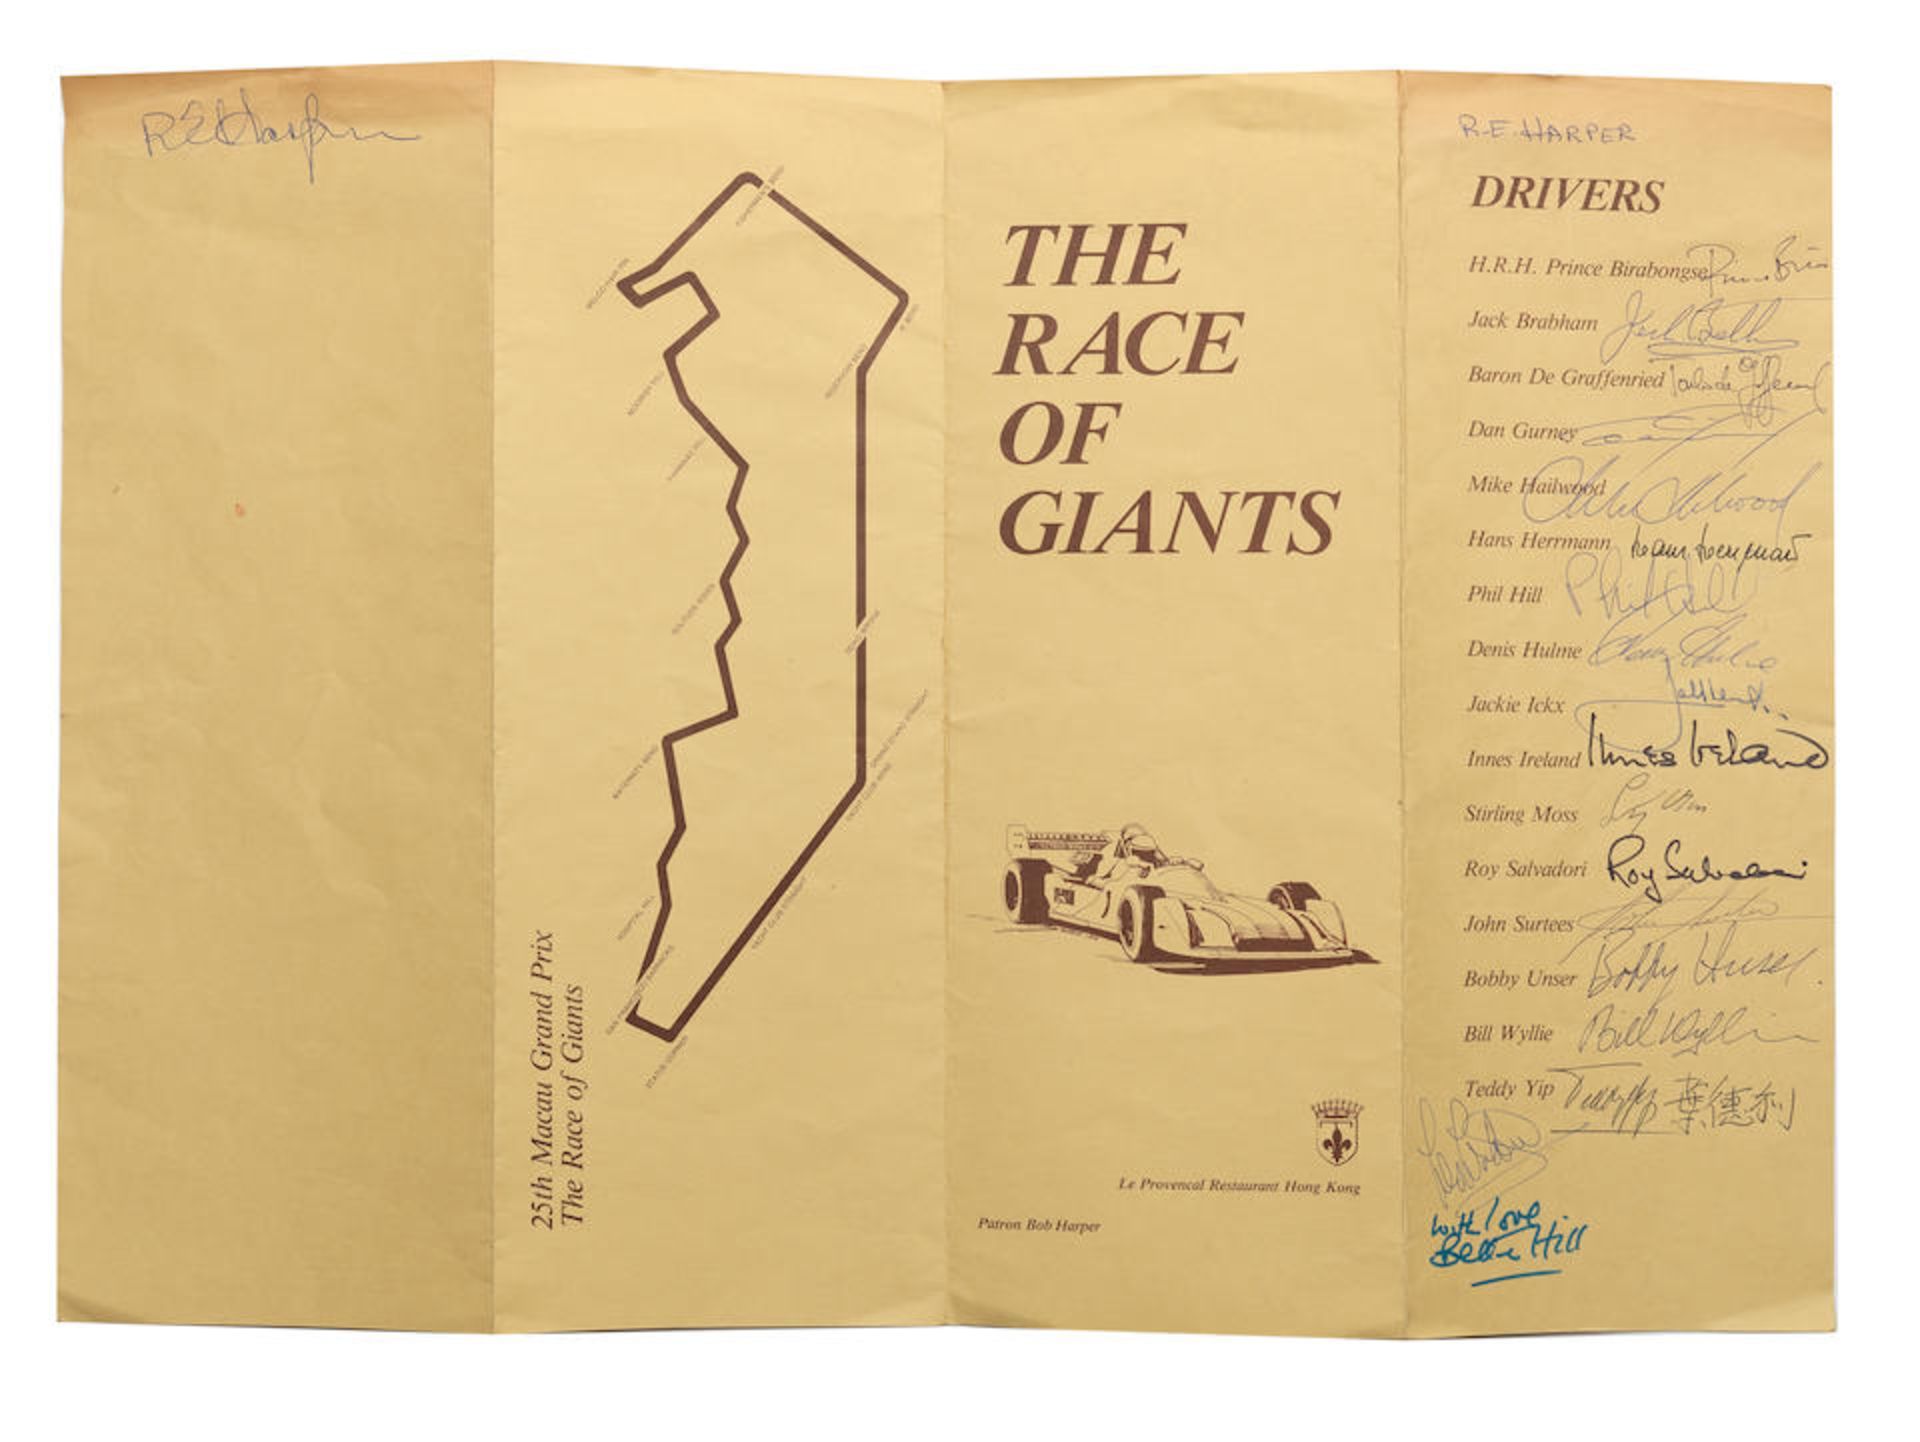 A 1978 Macau Grand Prix 'The Race of Giants' dinner menu signed by various drivers, - Image 3 of 3